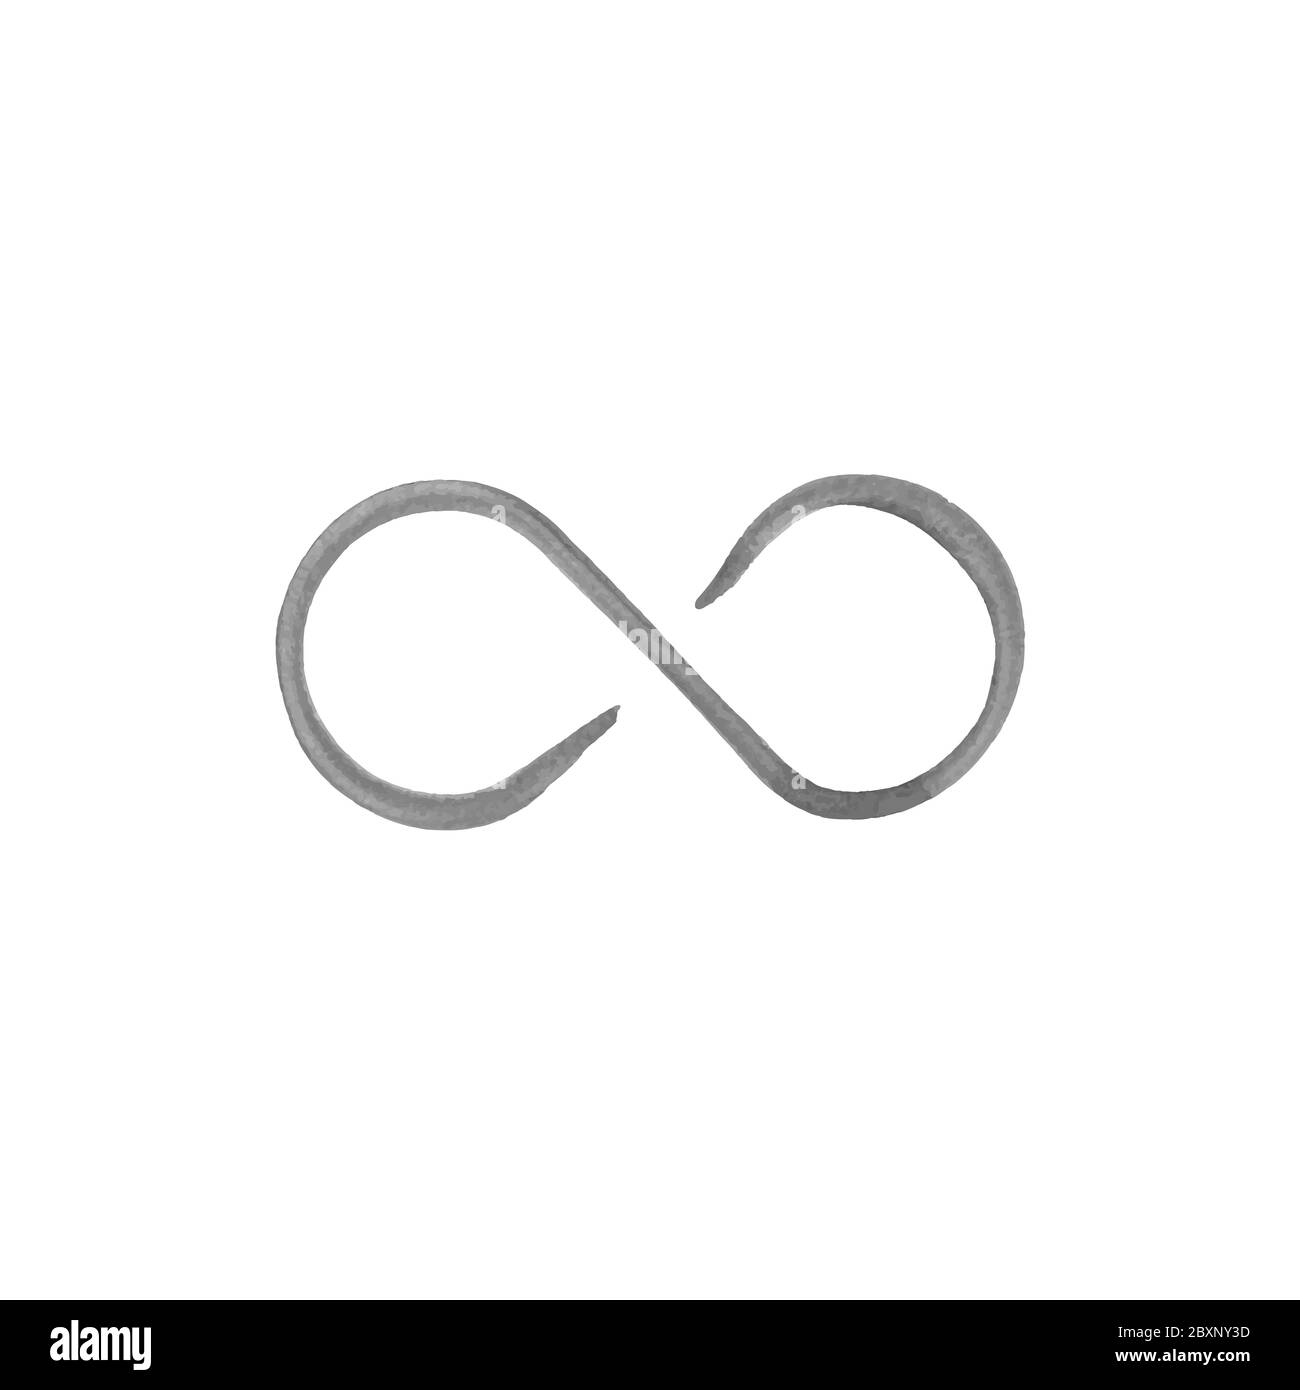 Hand drawn watercolor infinity sign. Stock Vector illustration isolated on white background. Stock Vector